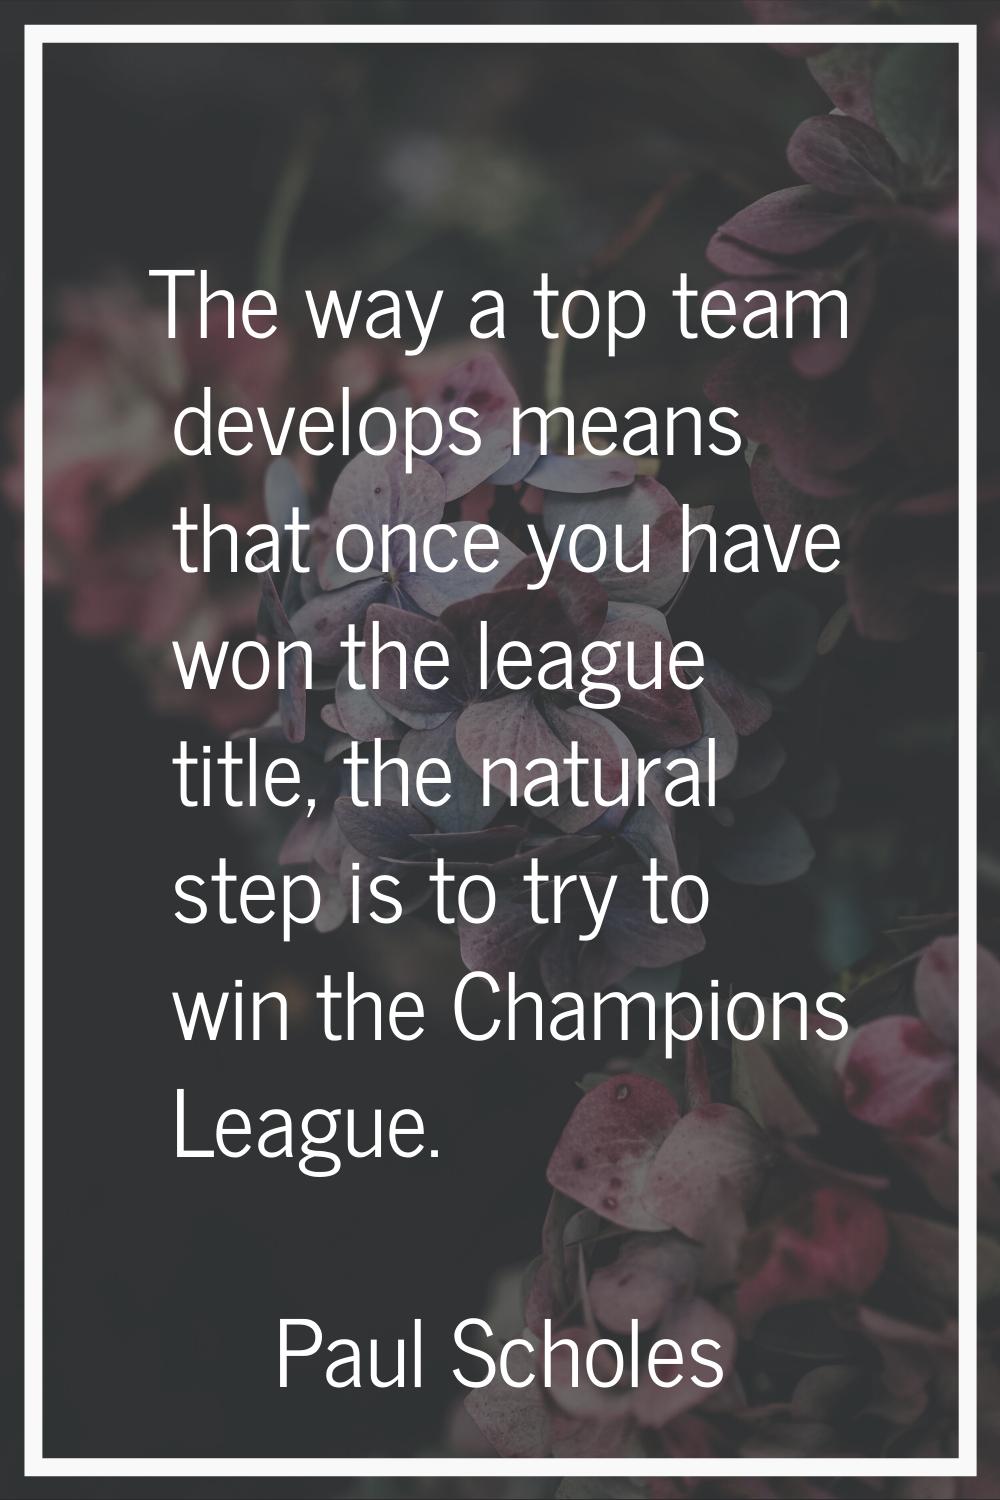 The way a top team develops means that once you have won the league title, the natural step is to t